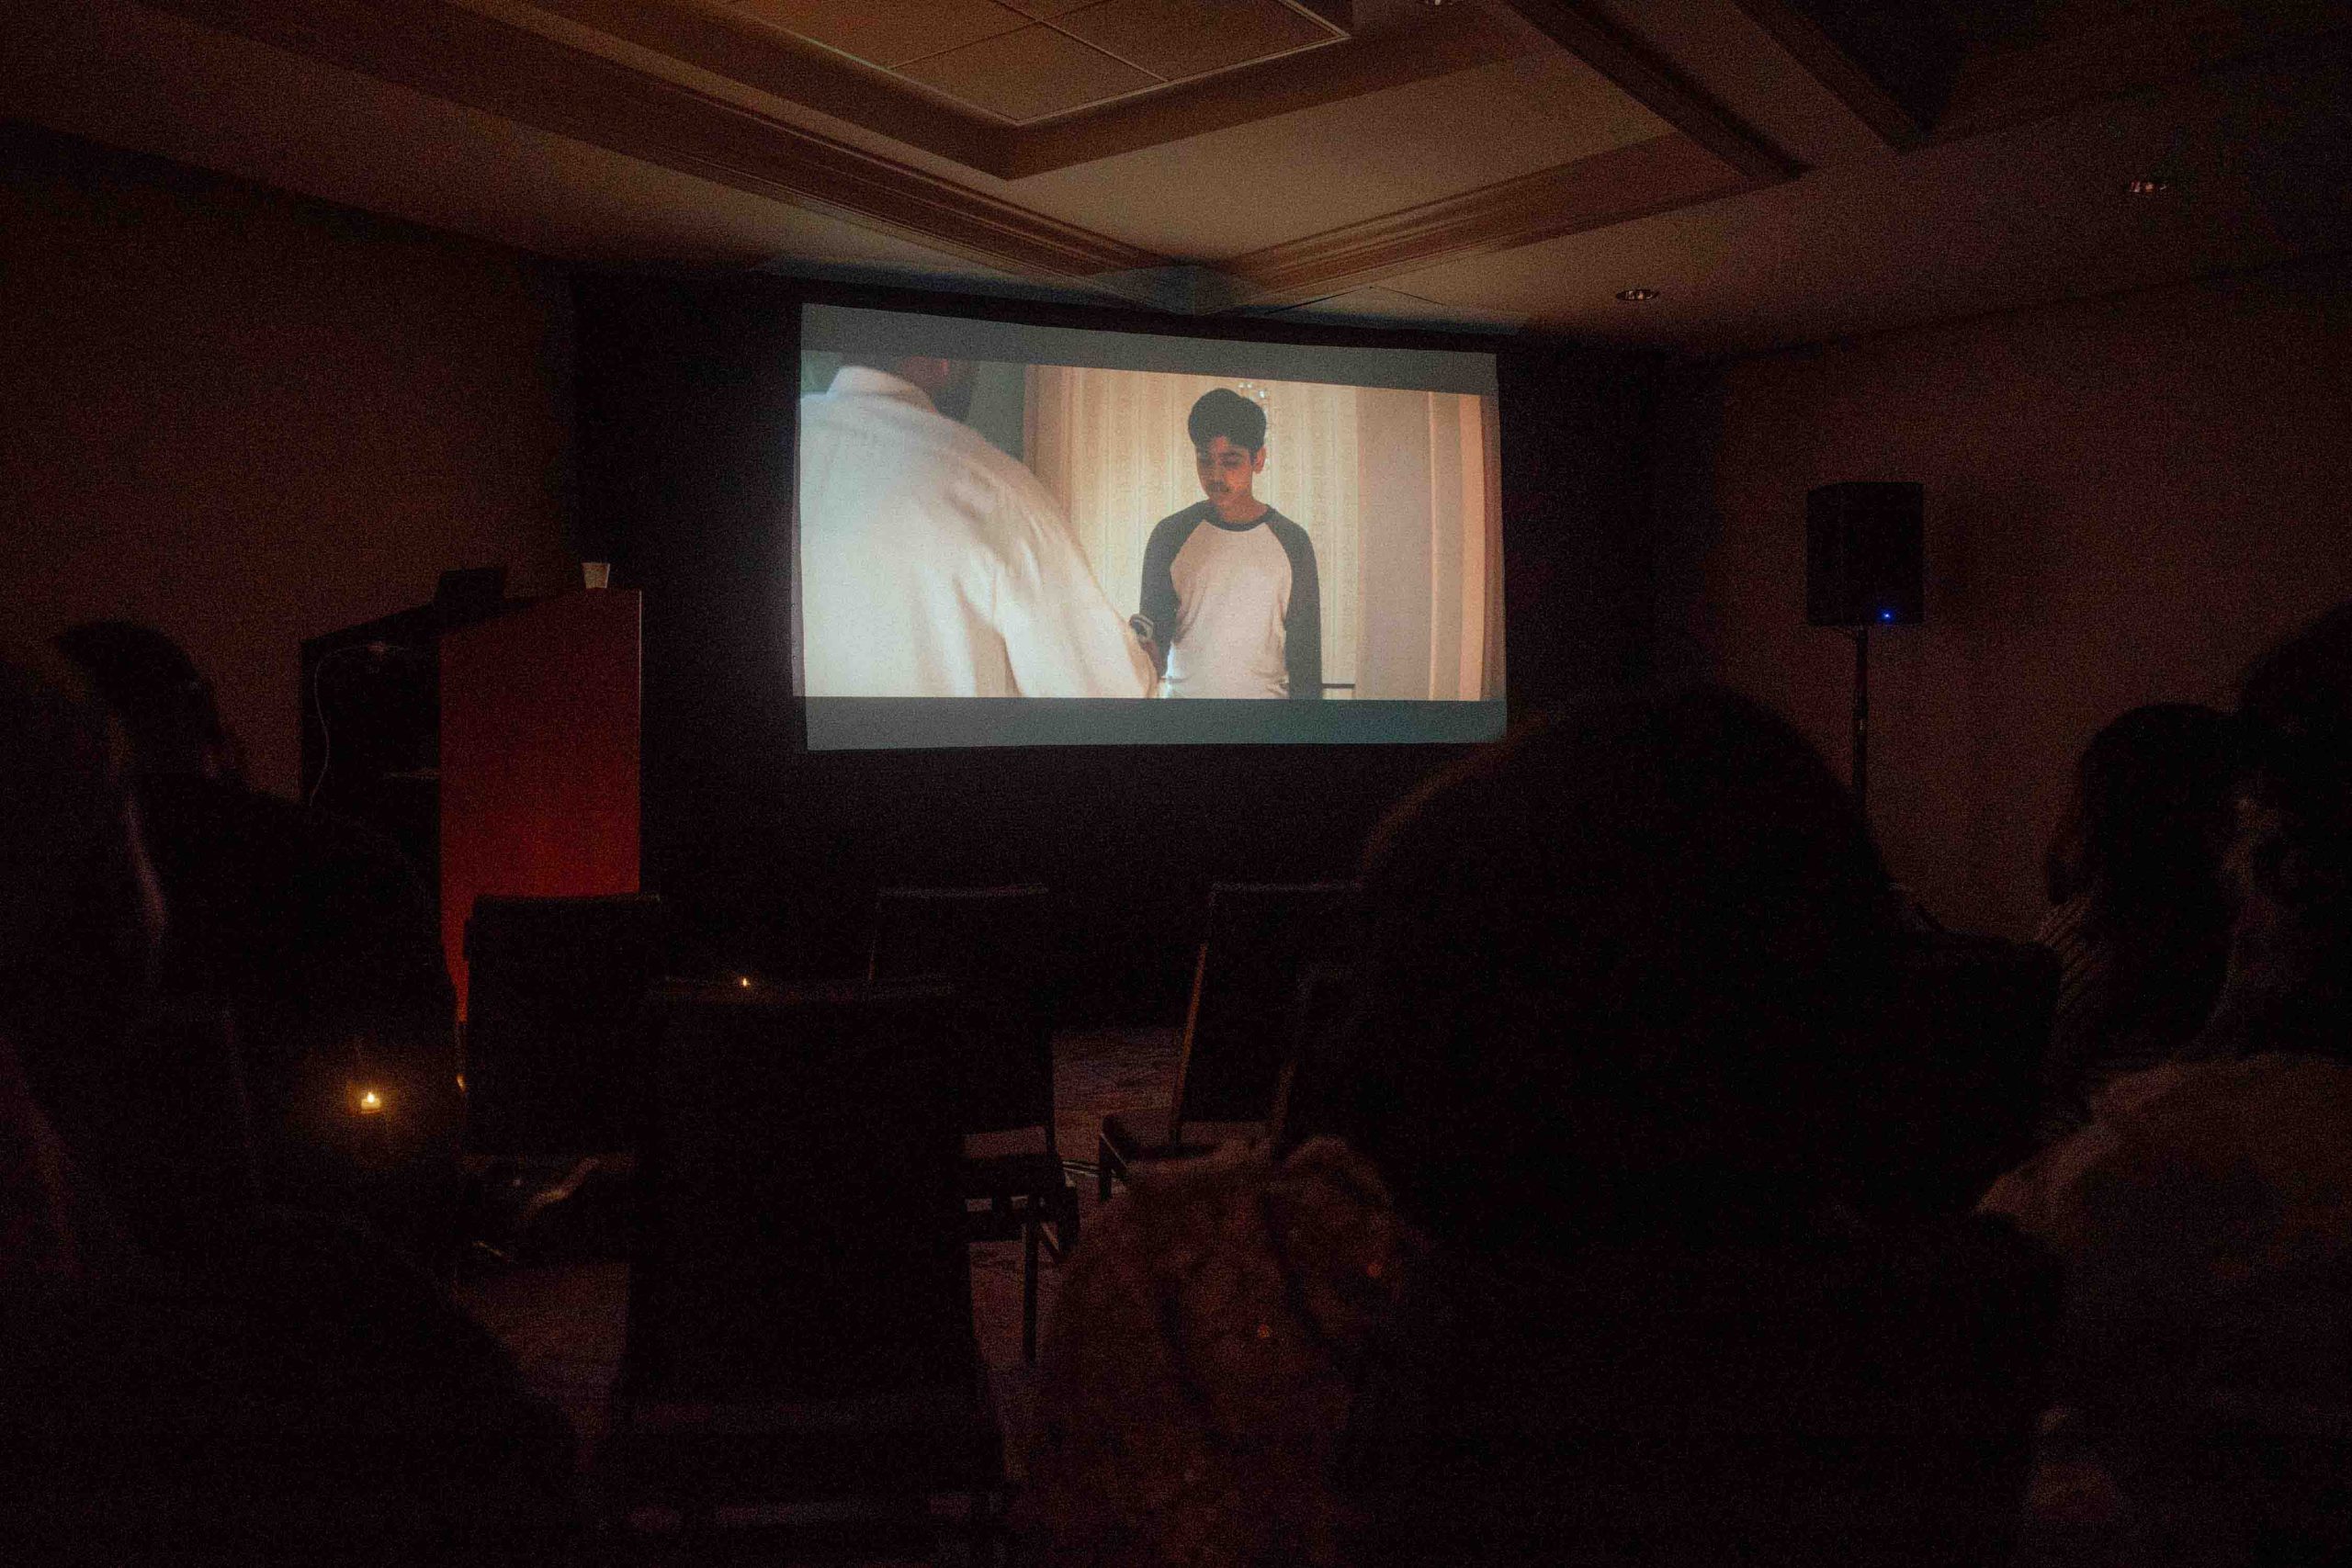 A projector screen in a dark conference room shows a scene from the film 